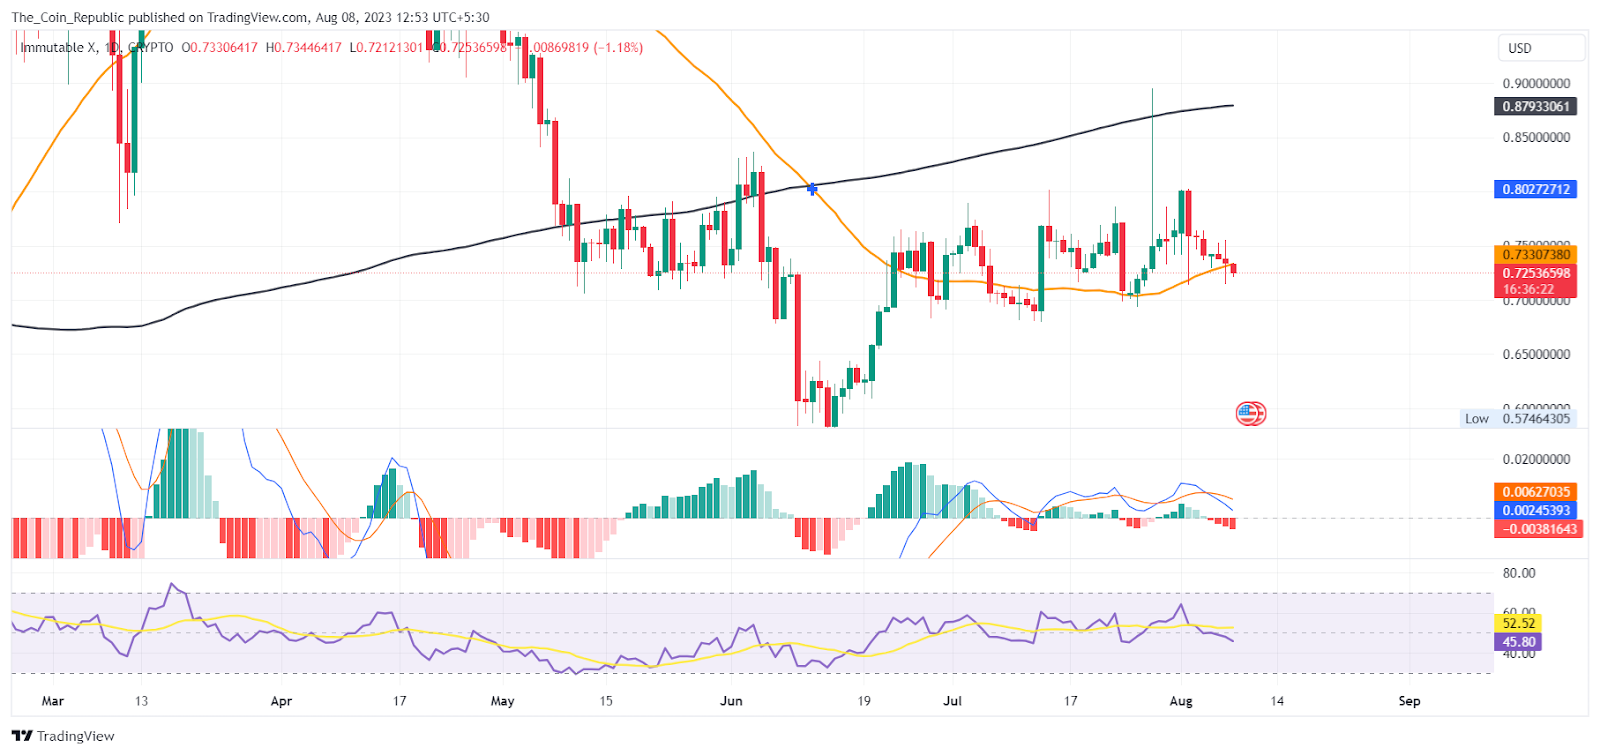 IMX Price Prediction: Is the Downtrend In Immutable Over Now?